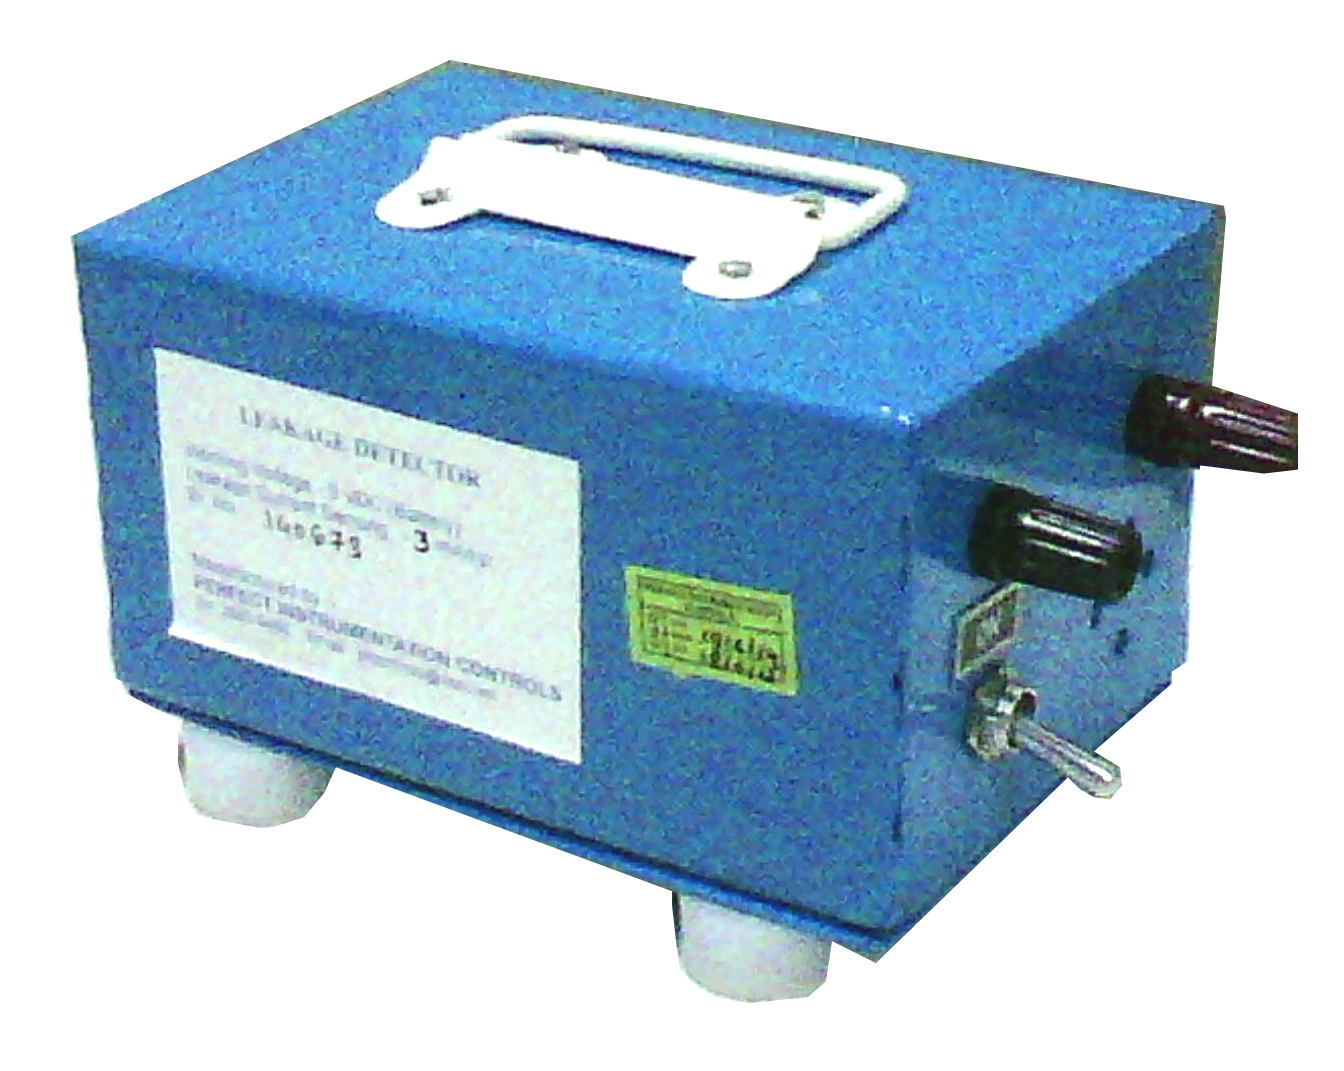 Manufacture of Leakage Detector